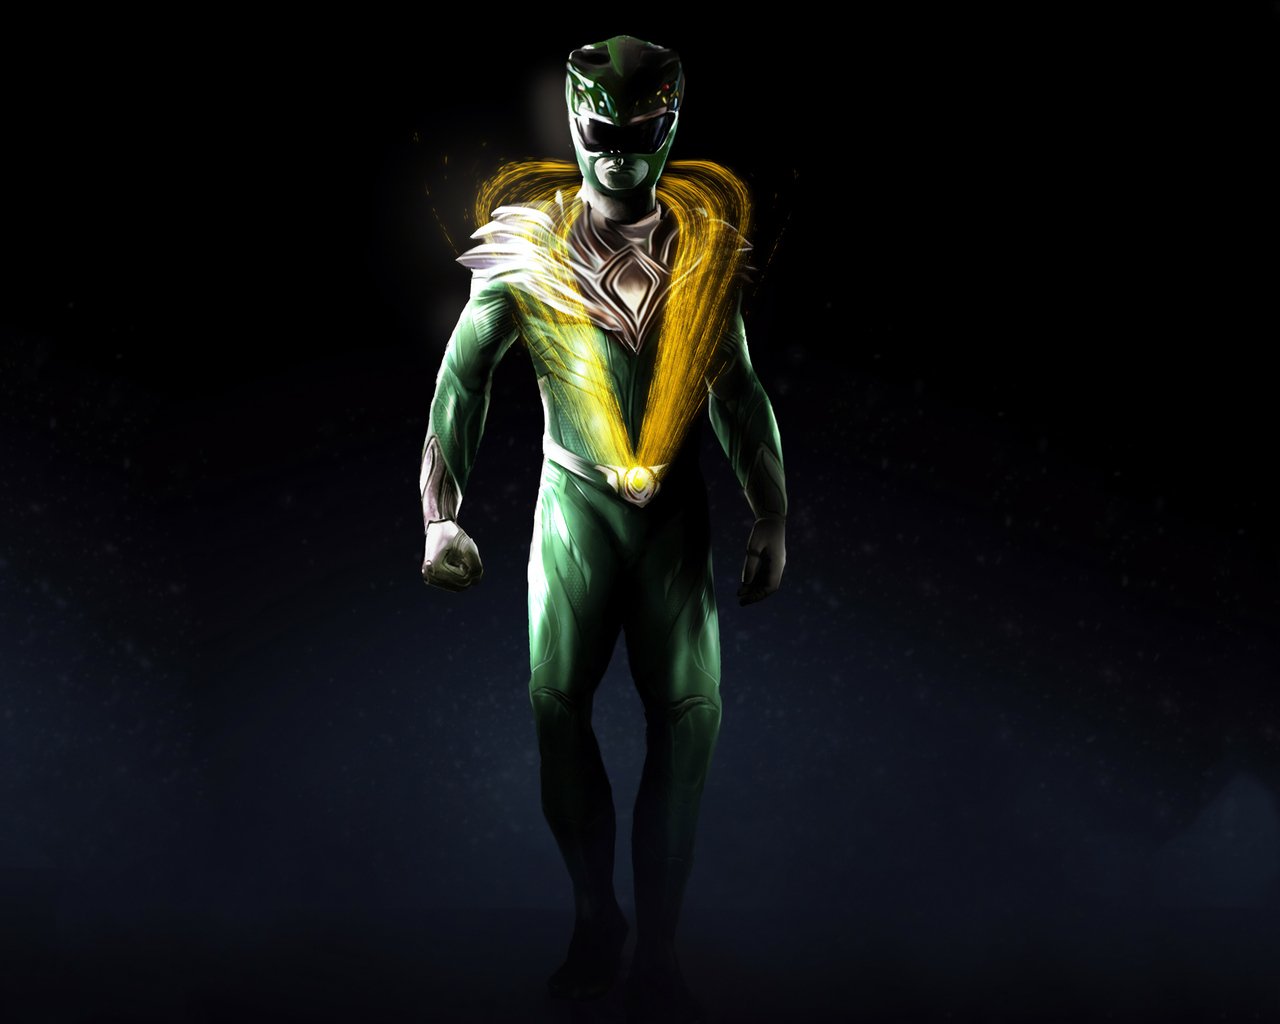 Power Rangers Tommy Oliver 1280x1024 Resolution HD 4k Wallpaper, Image, Background, Photo and Picture